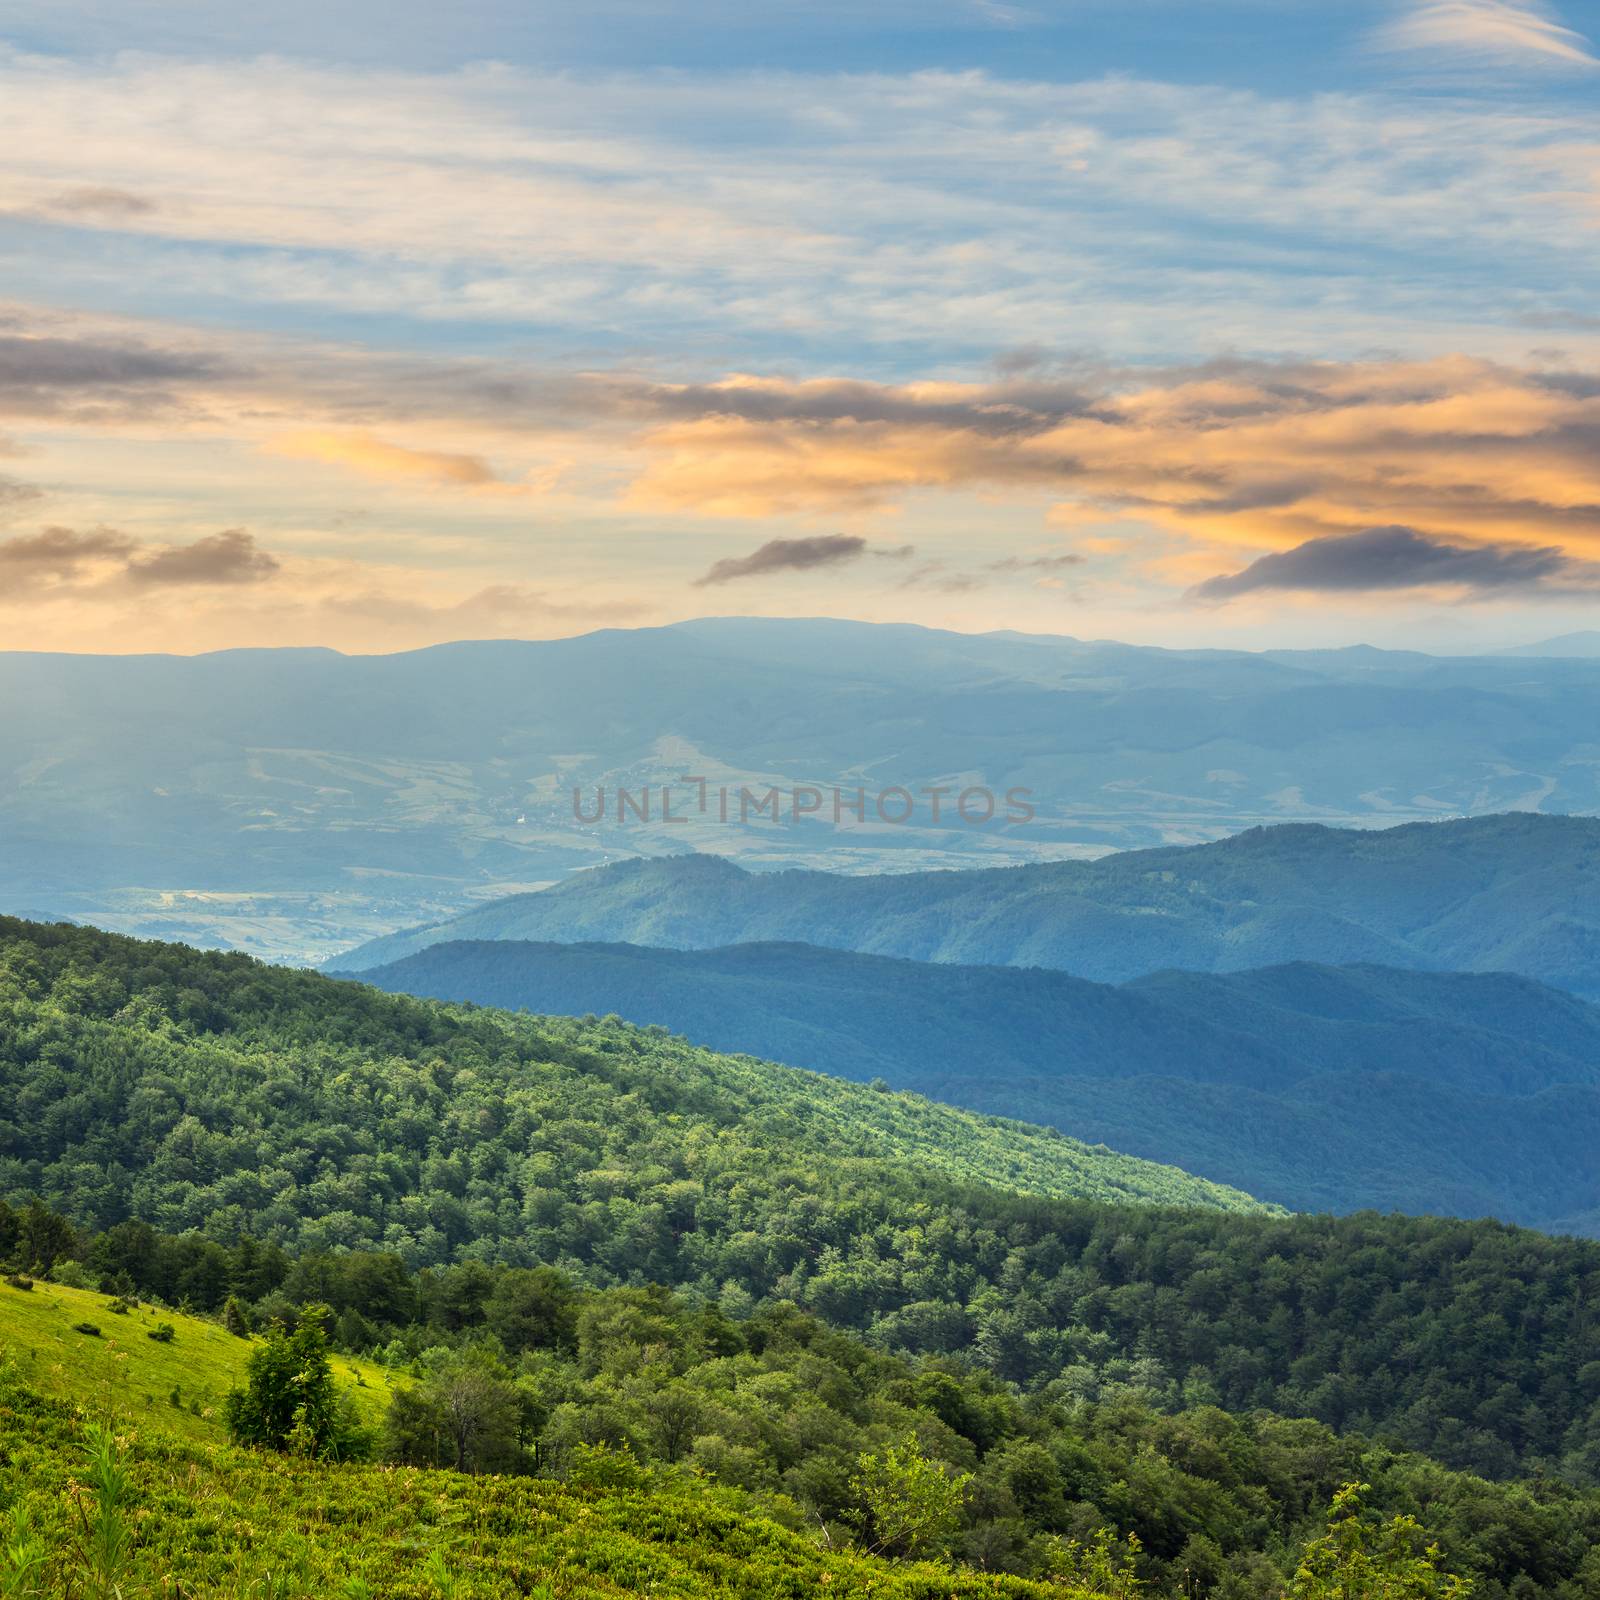 slope of mountain range with coniferous forest and village slope at sunrise